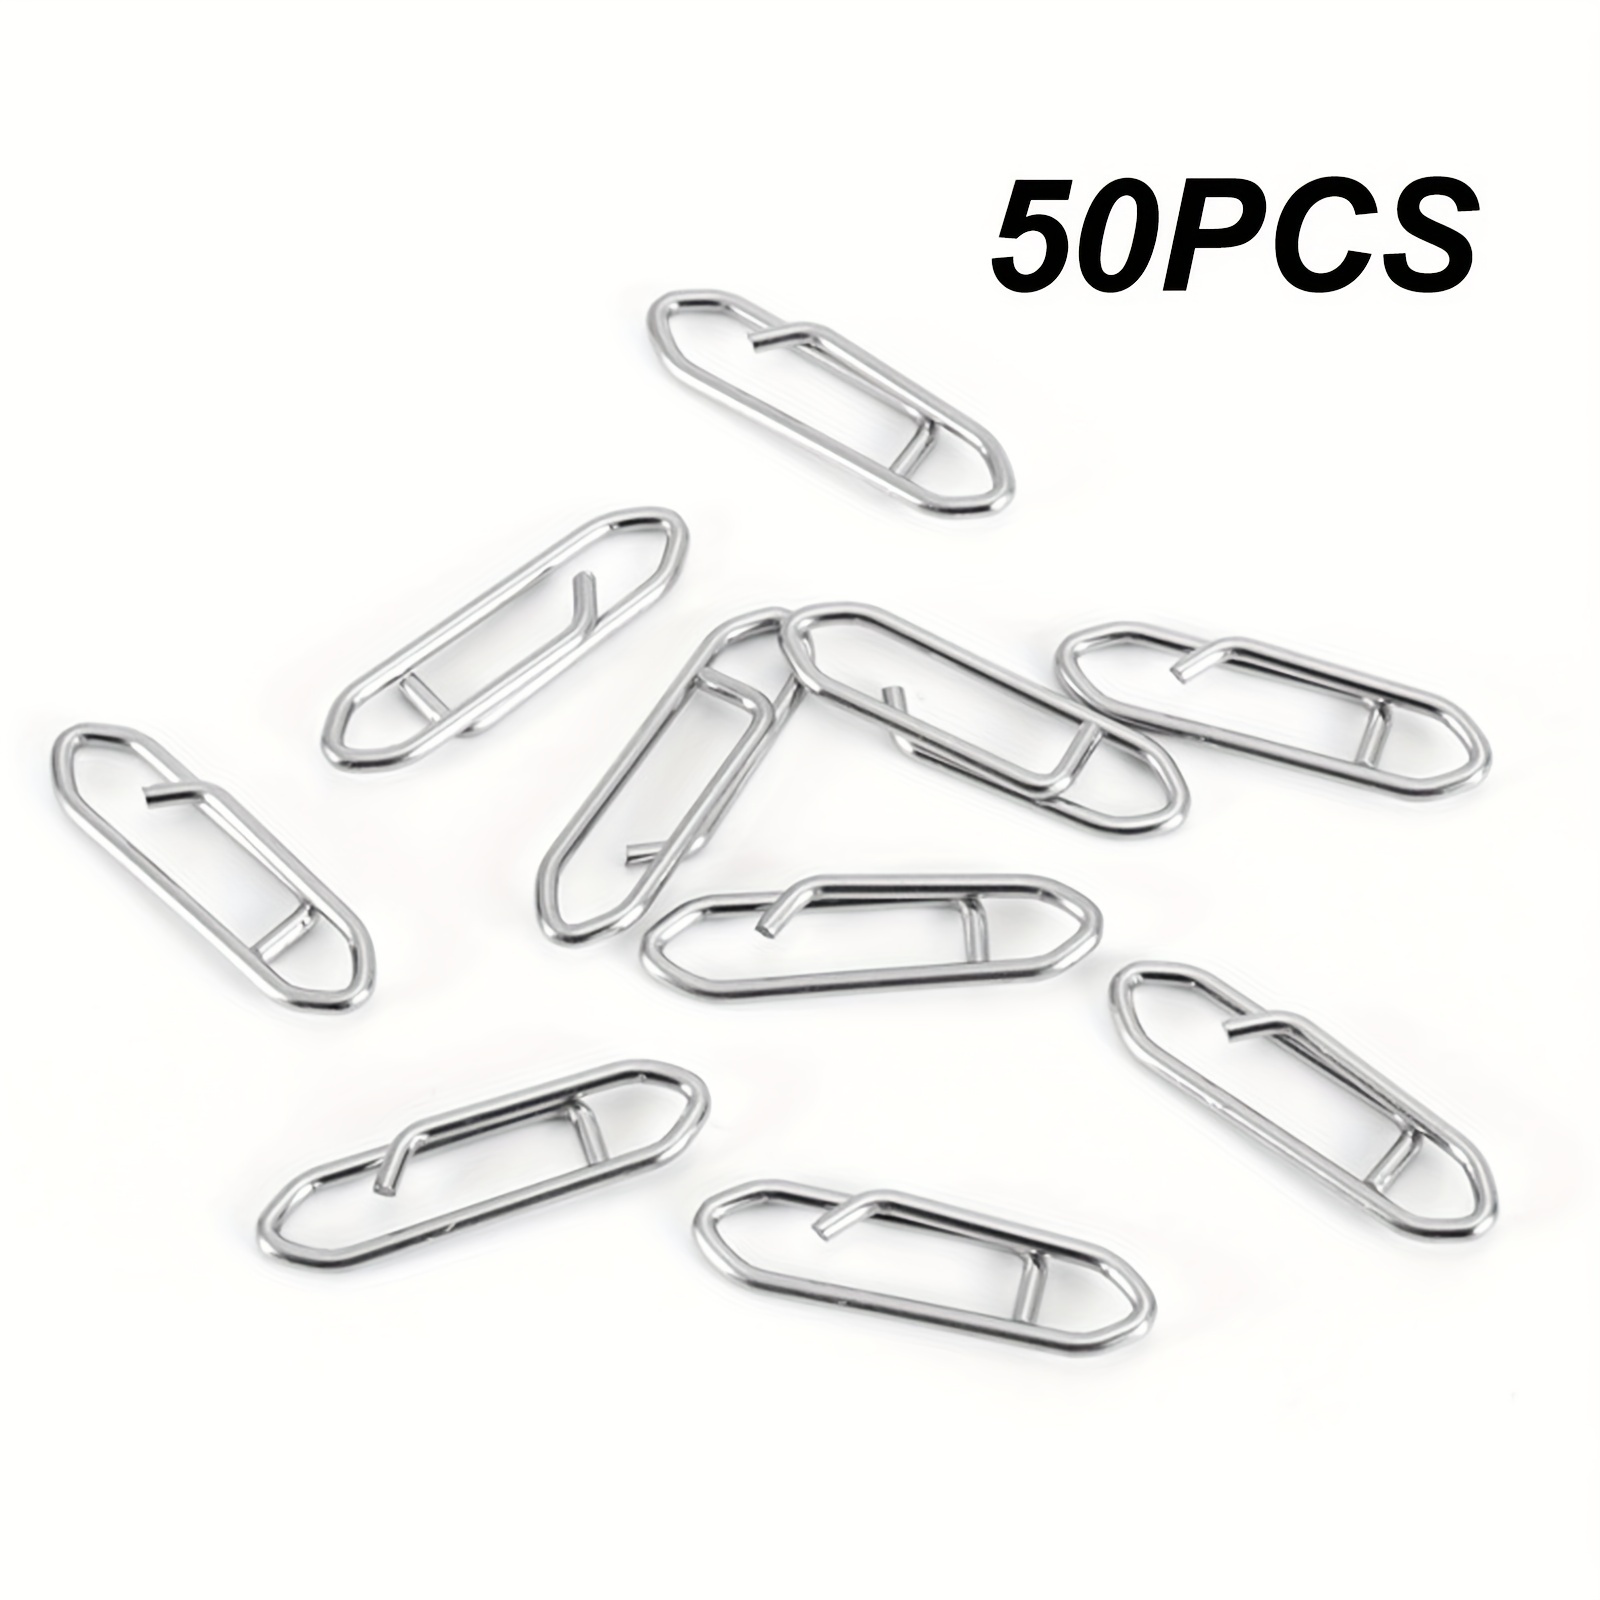 50 Pcs Tactical Anglers Power Clips - Quick Fishing Snaps & Stainless Steel  Decoy Longline Clips for Easy Lure Changes!